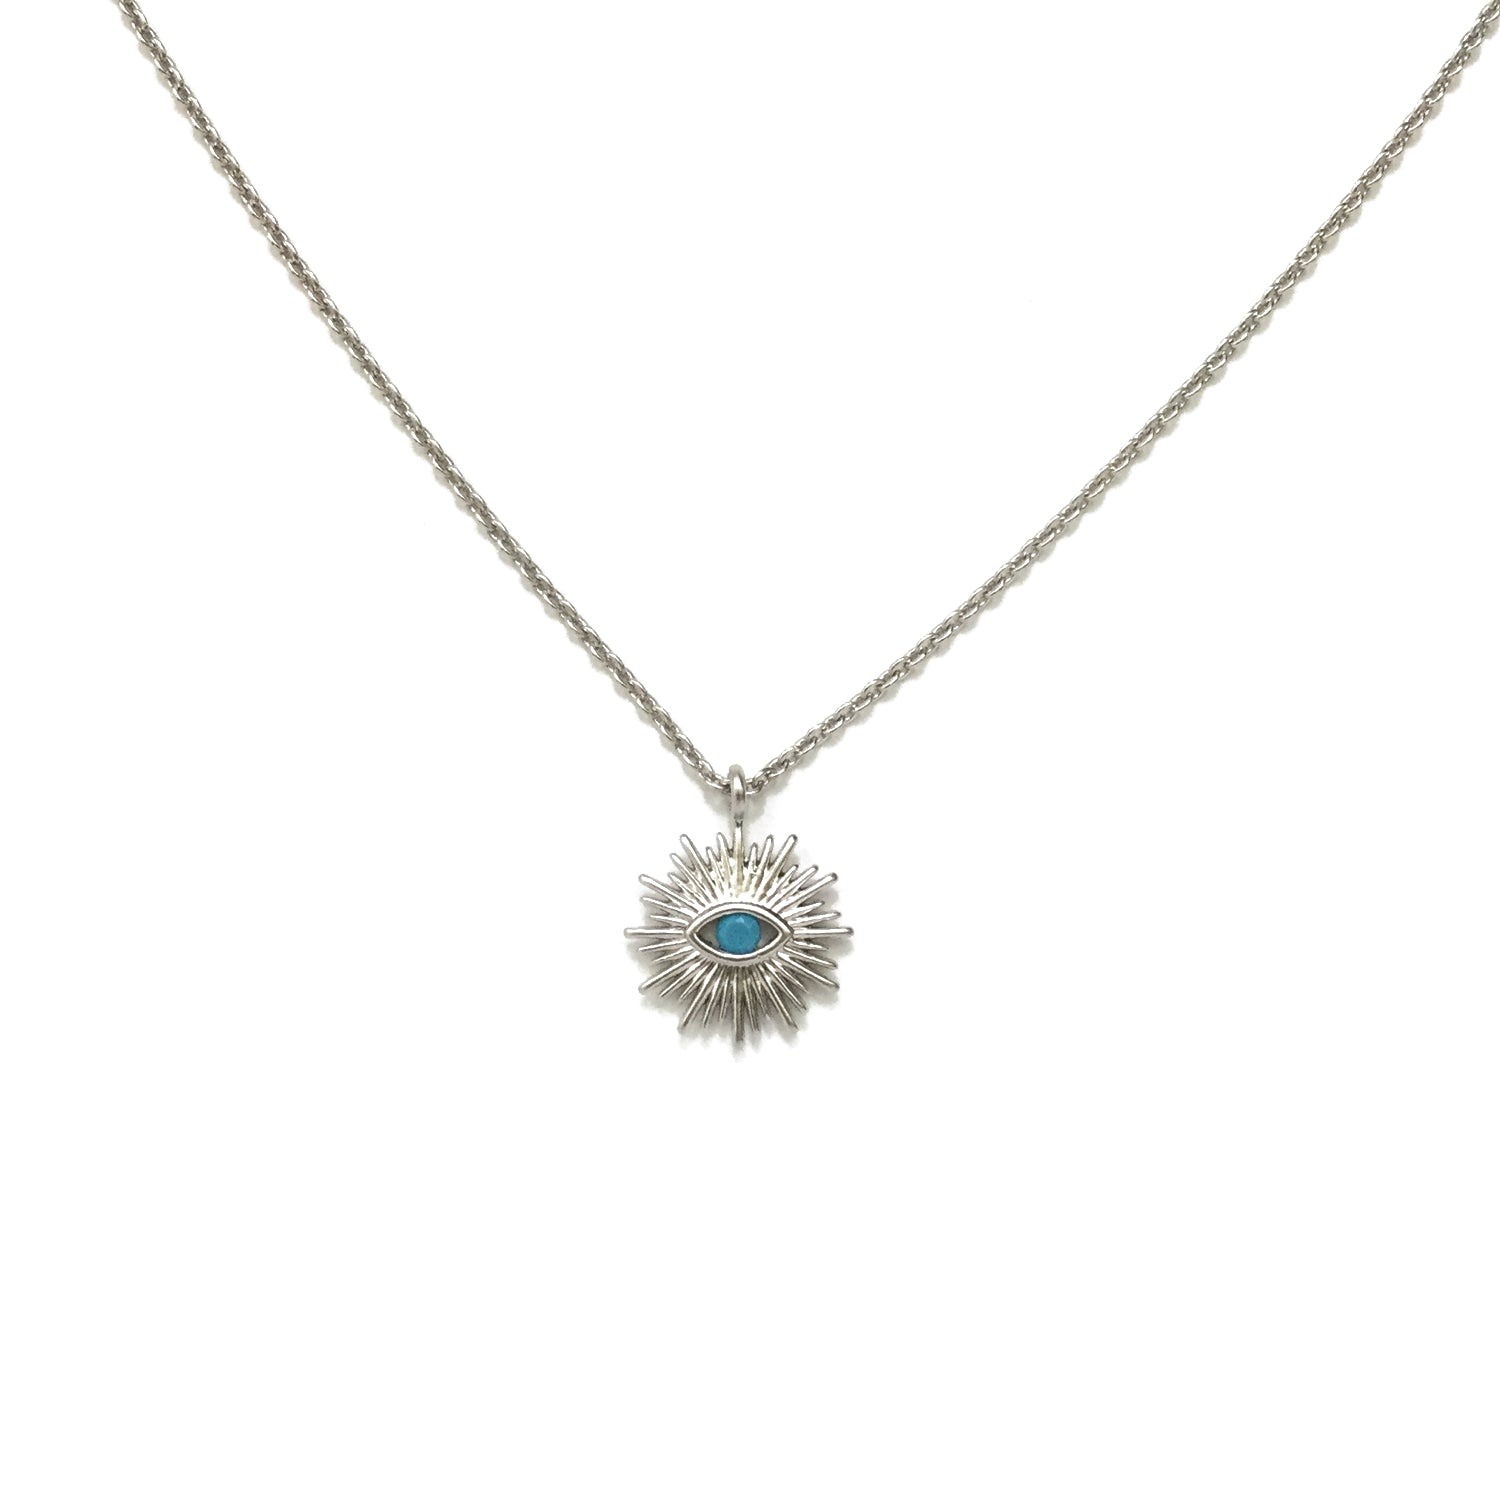 Silver plated evil eye and turquoise starburst necklace